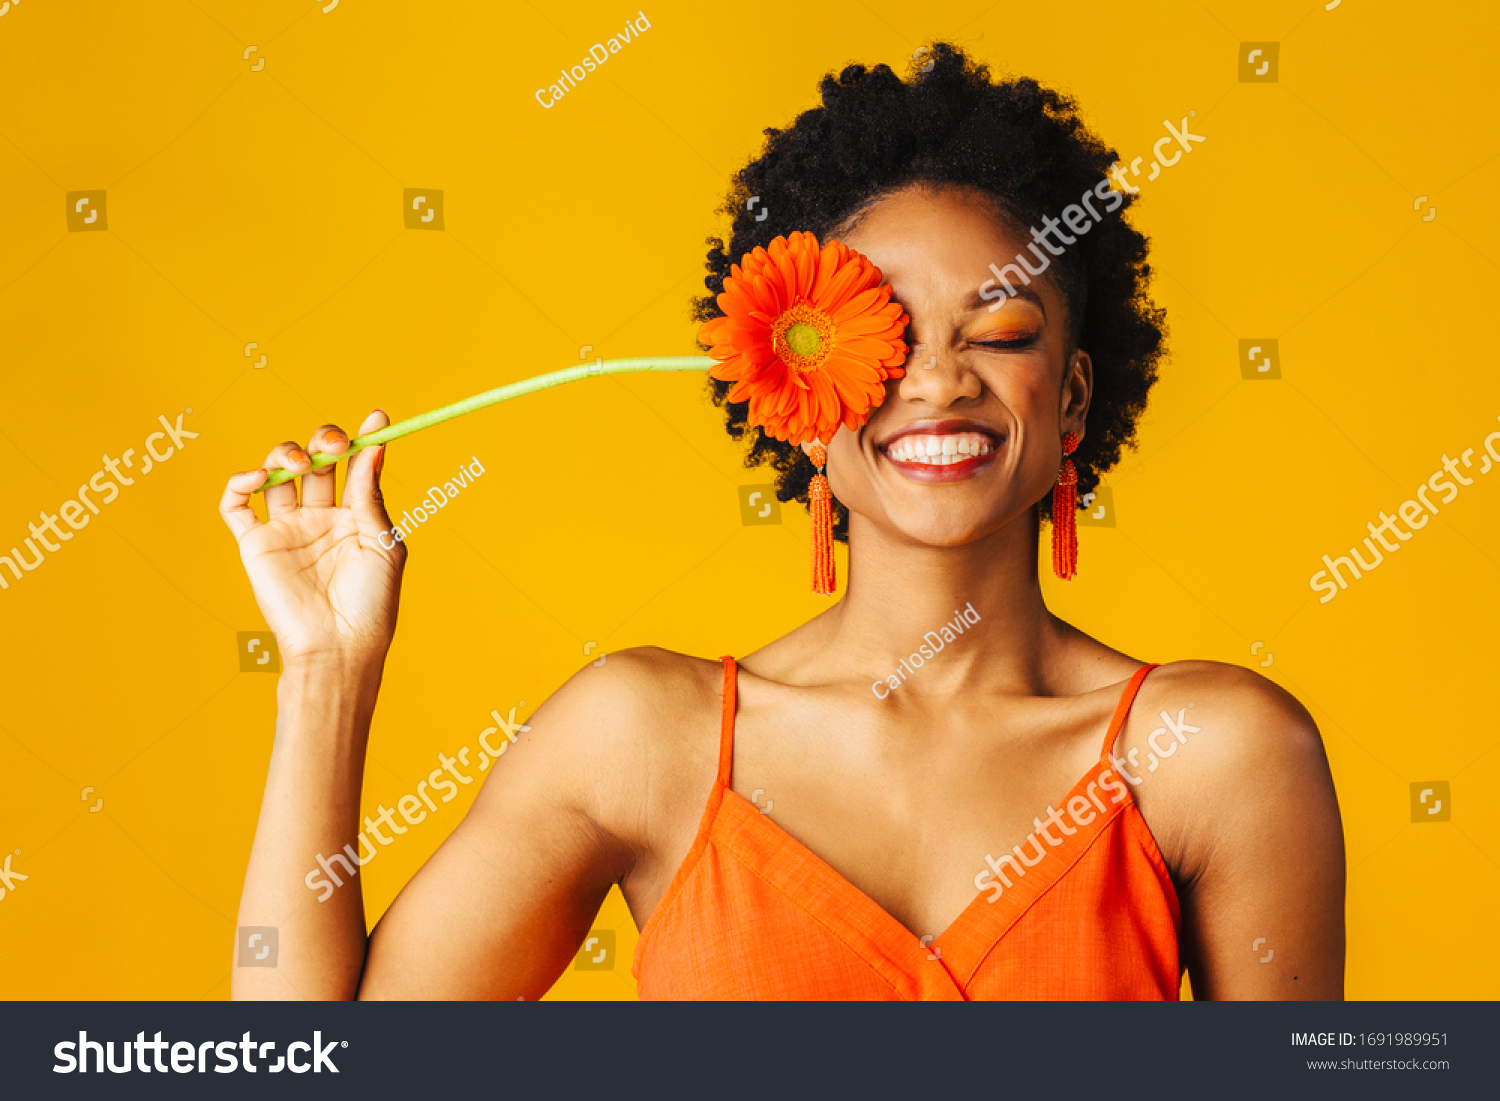 Portrait of a happy young woman holding orange Gerbera daisy covering her eye with eyes closed #1691989951